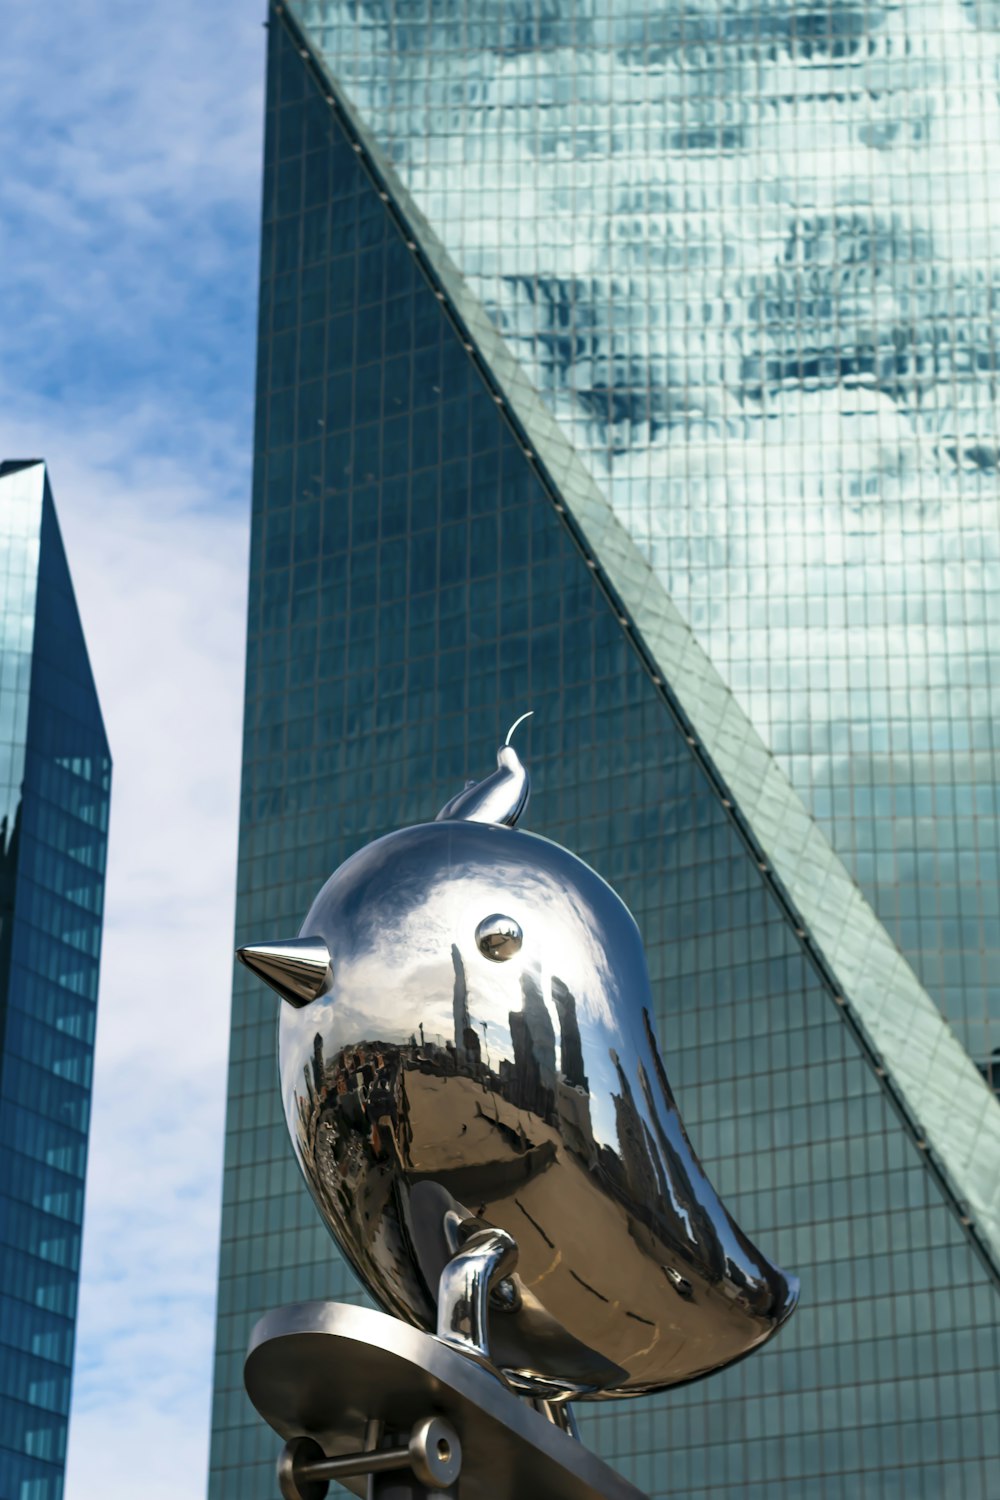 silver globe statue near glass building during daytime